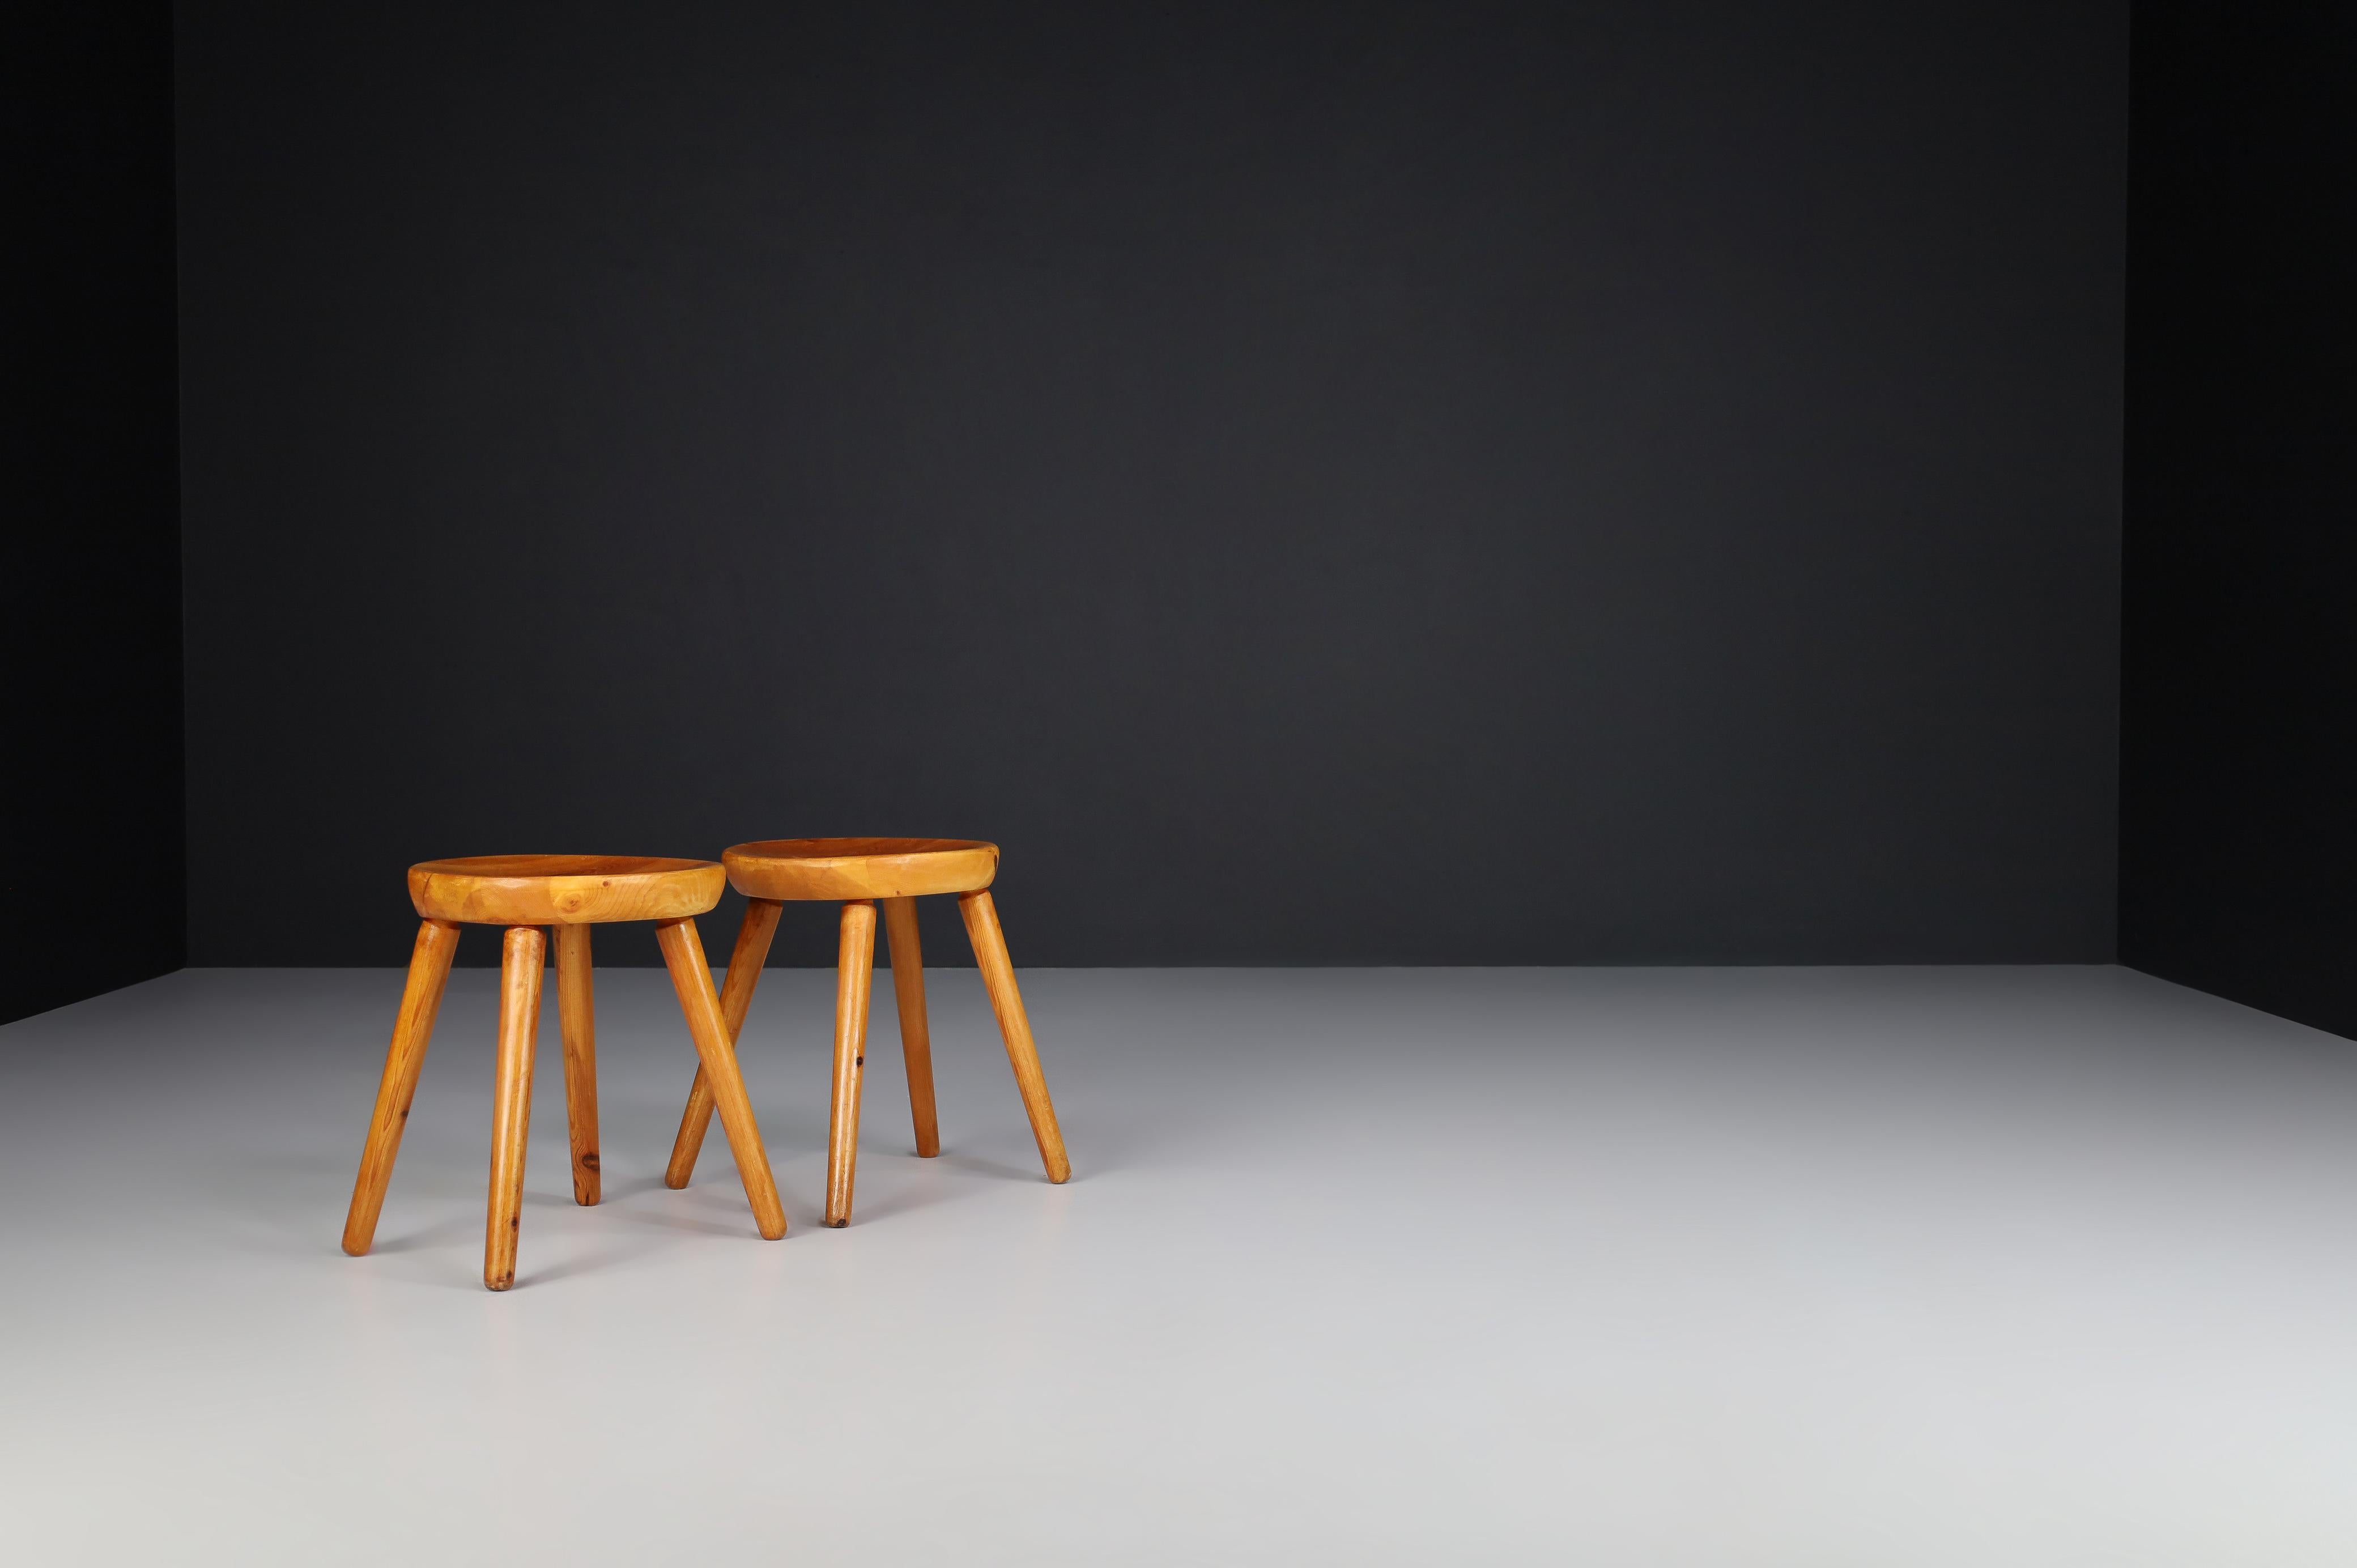 Pinewood French Stools in the Style of Charlotte Perriand, France, 1950s For Sale 4